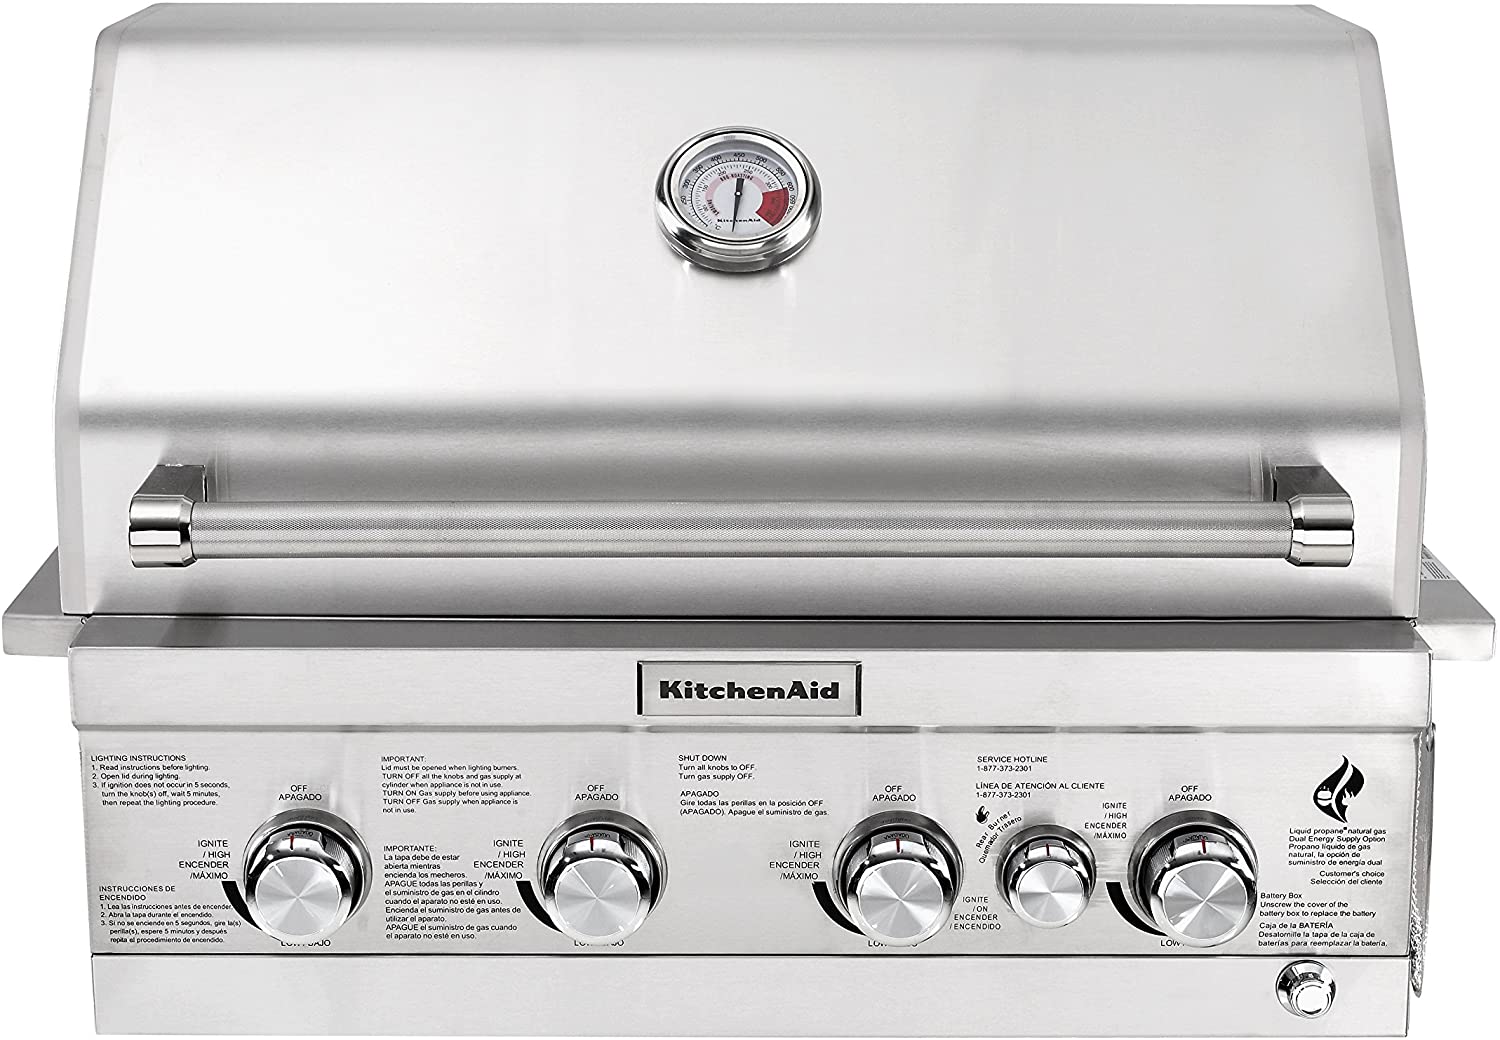 KitchenAid 740-0780 Built-in Propane Gas Grill